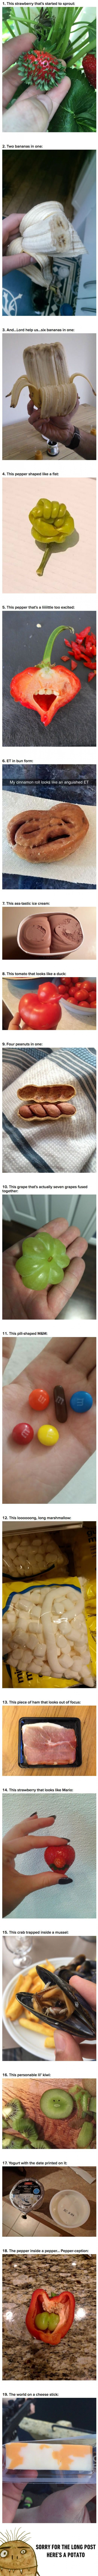 19 Pictures Of Food That Will Leave You Speechless